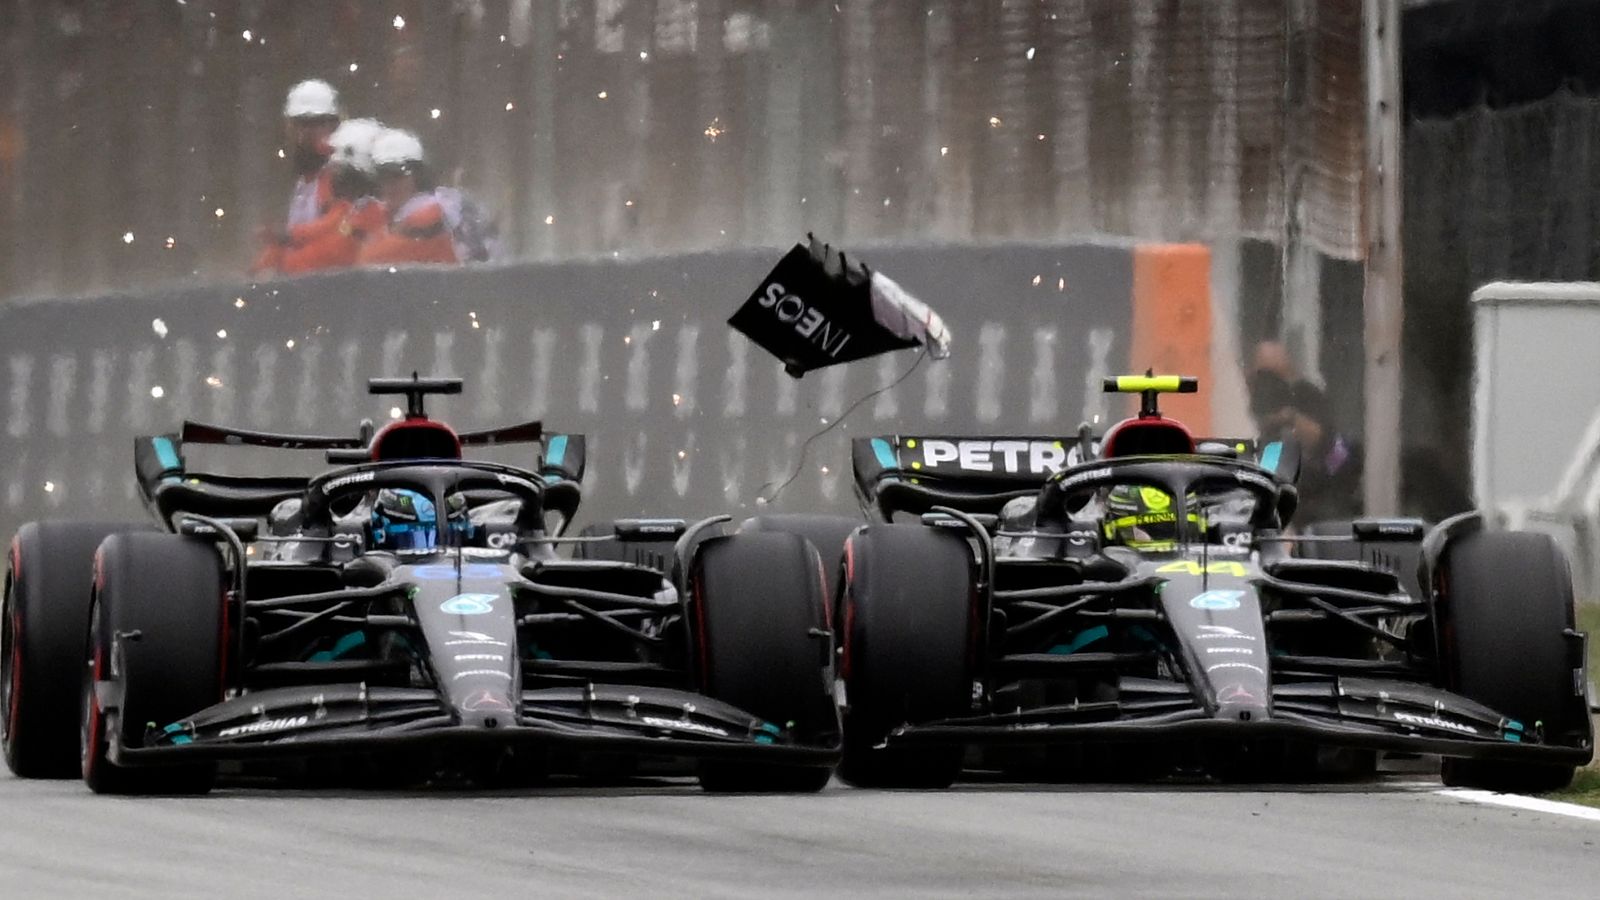 Mercedes plan review as Lewis Hamilton and George Russell collide in Spanish Grand Prix Qualifying